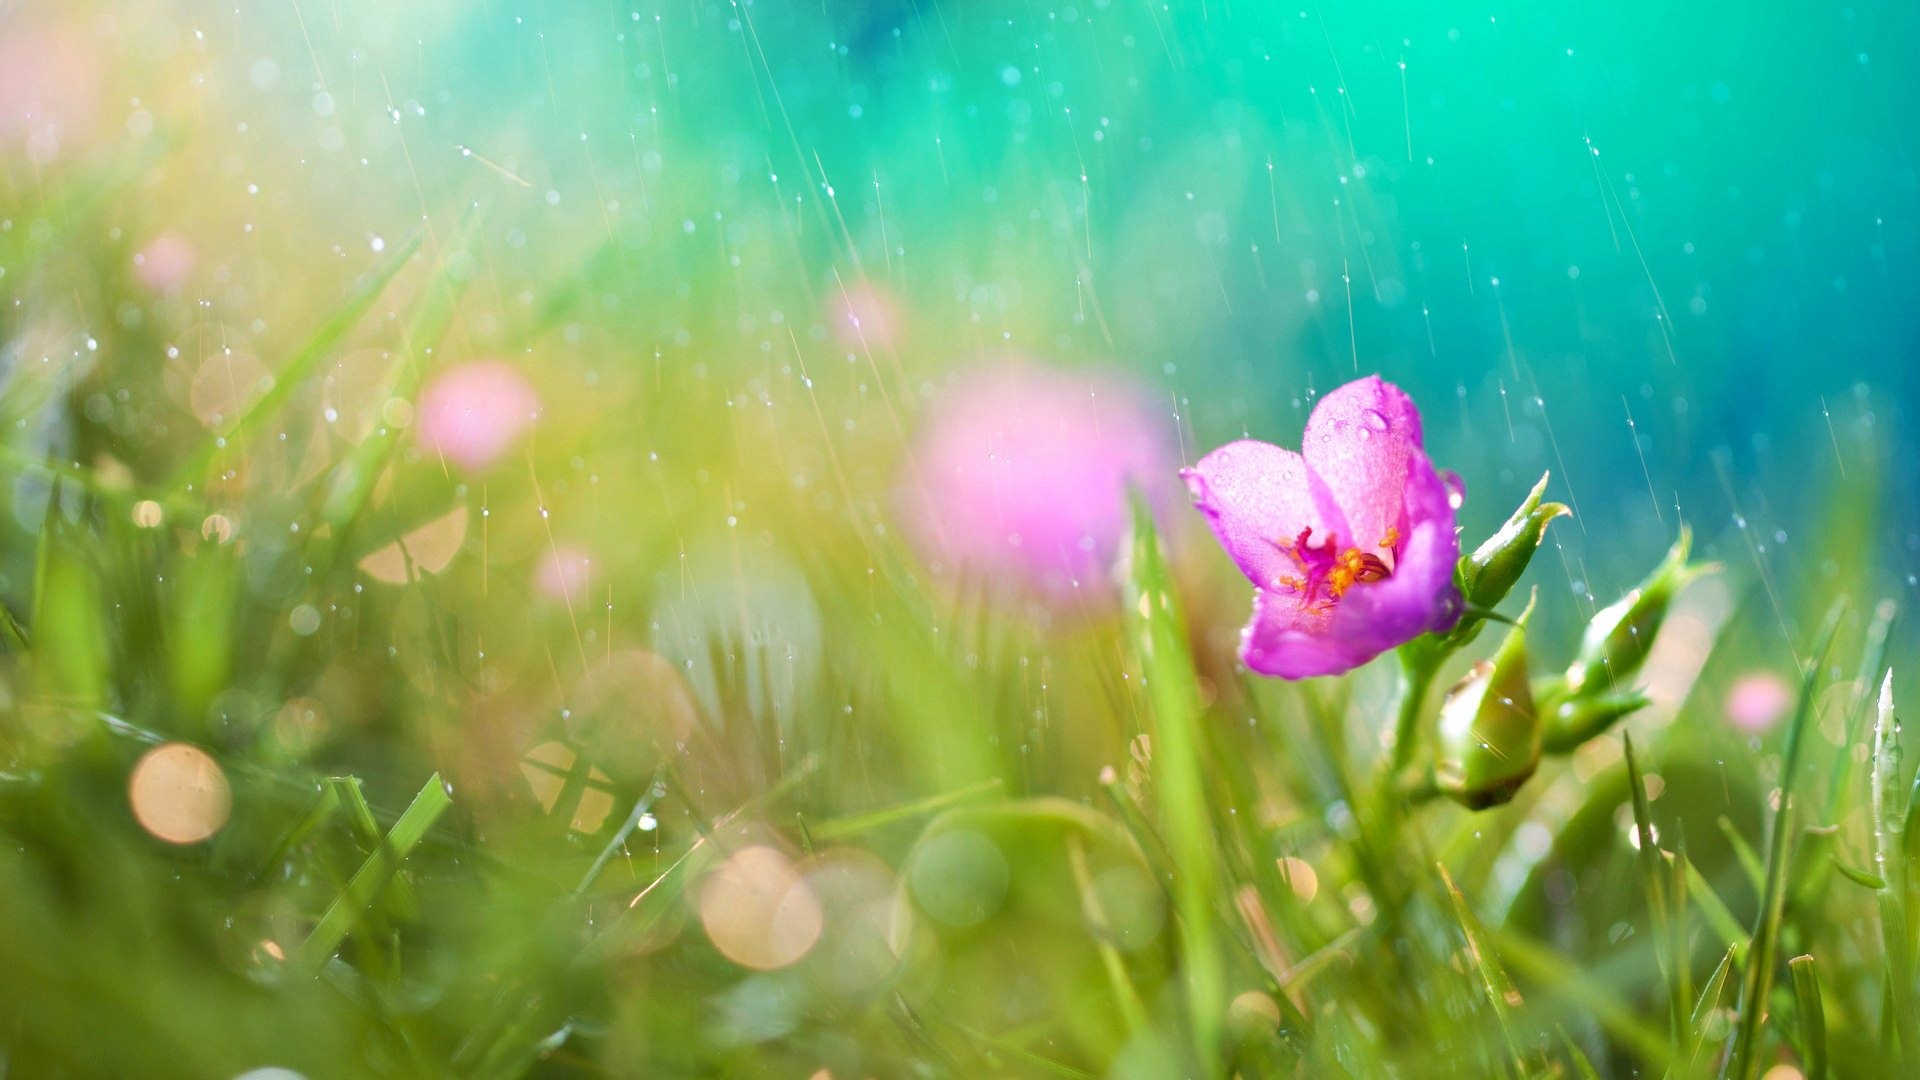 1920x1080 Beautiful Rainy Desktop Wallpapers | HD Wallpapers | Pictures | Images .